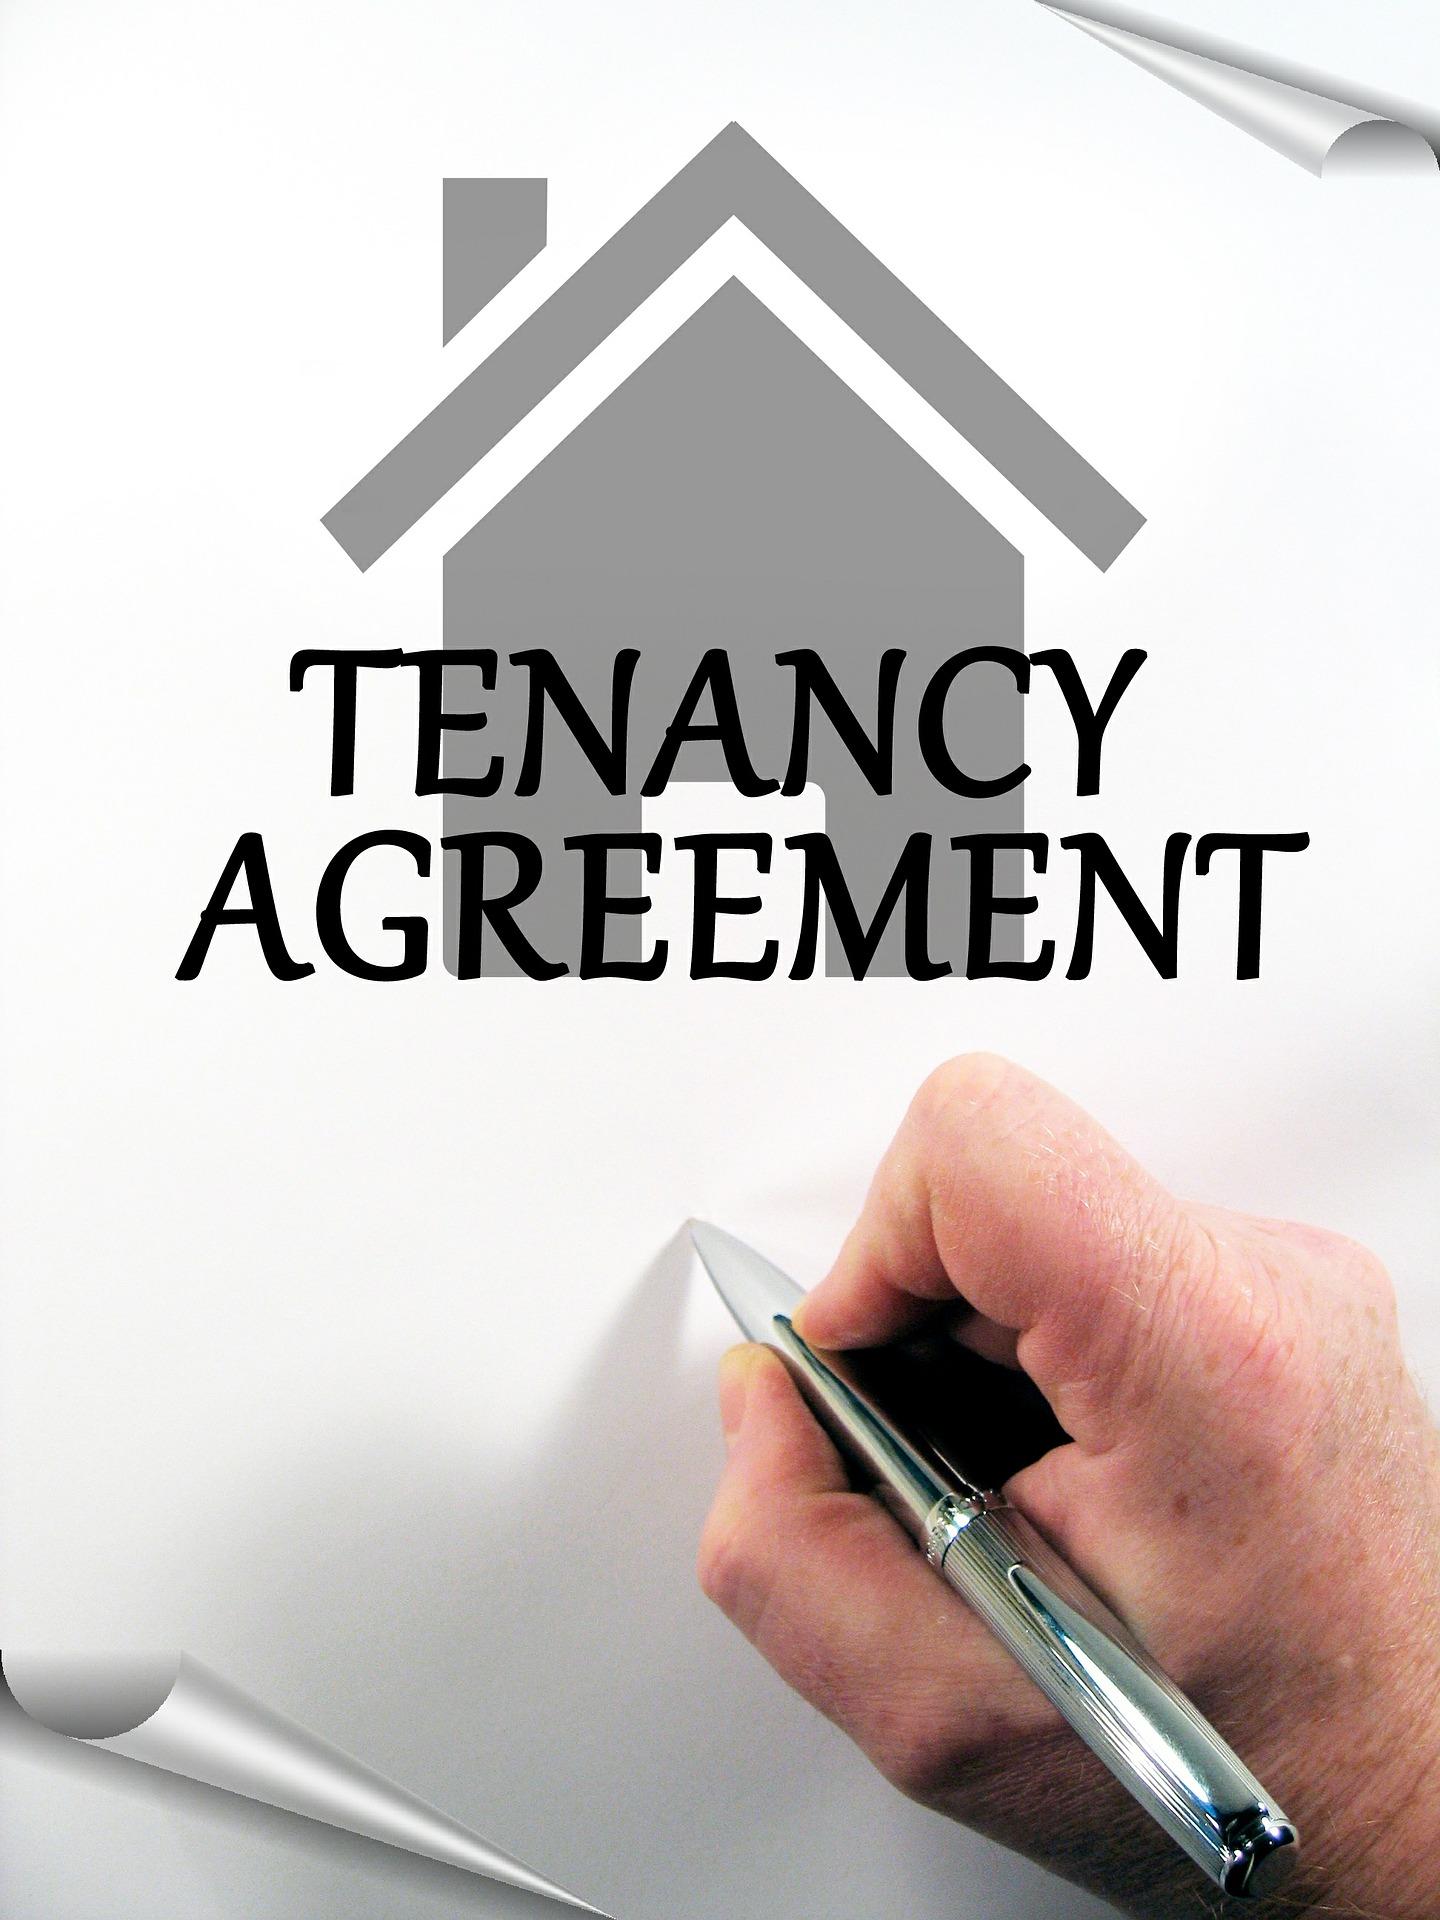 Signing a tenancy agreement